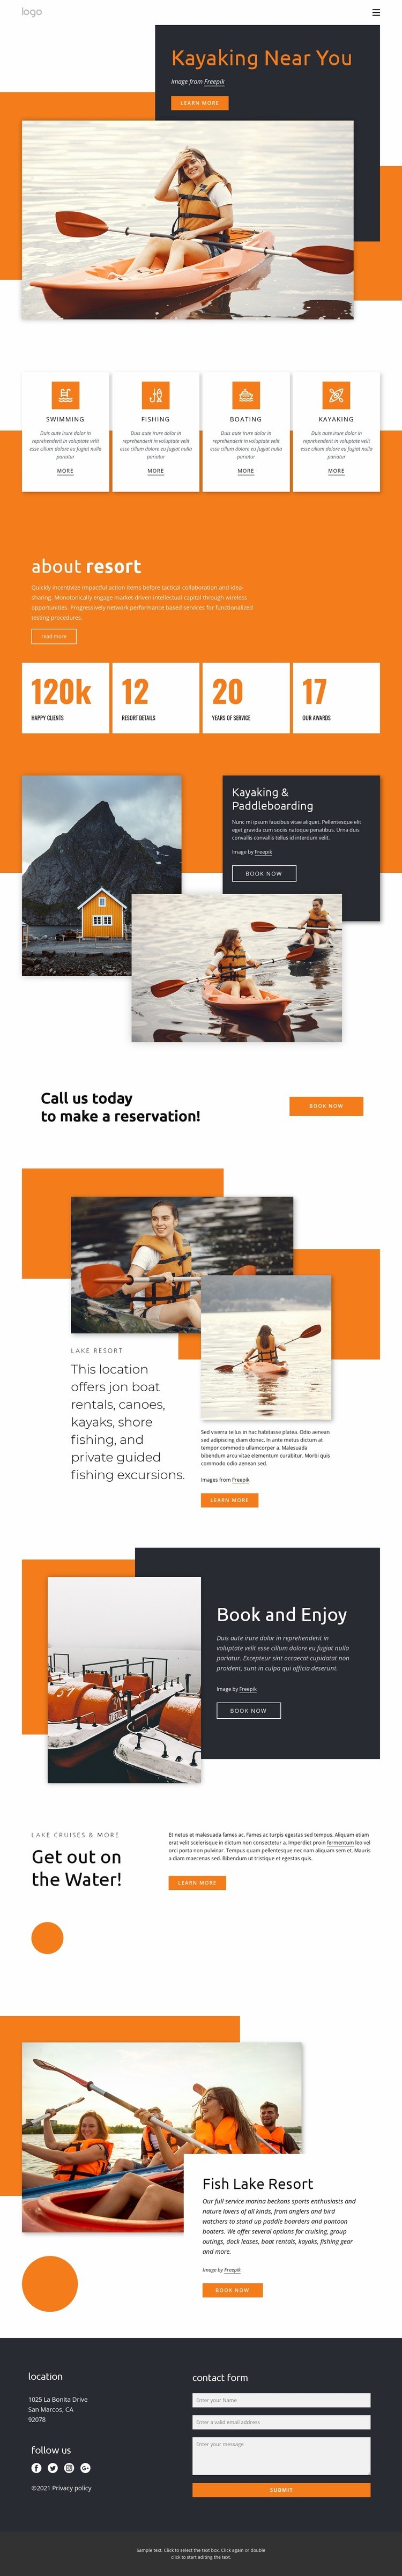 Canoeing and kayaking Web Page Design